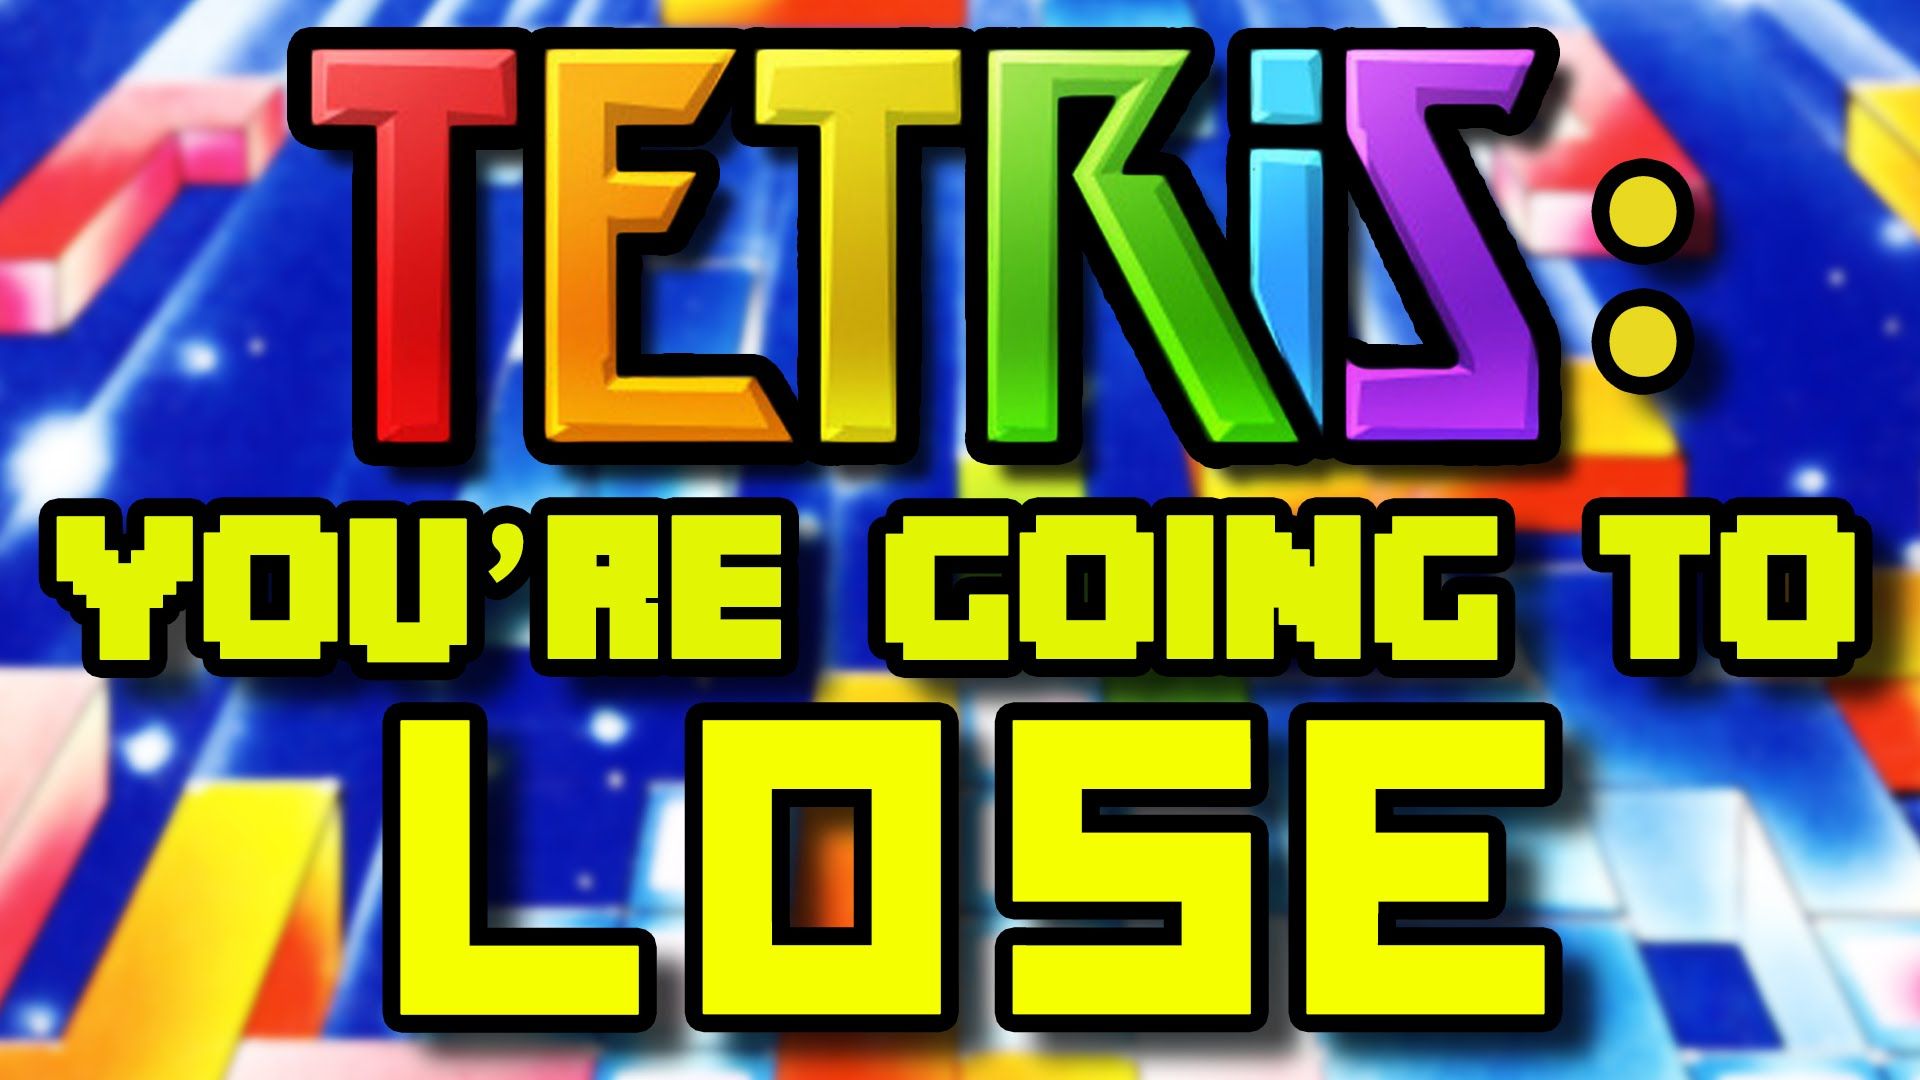 tetris meaning